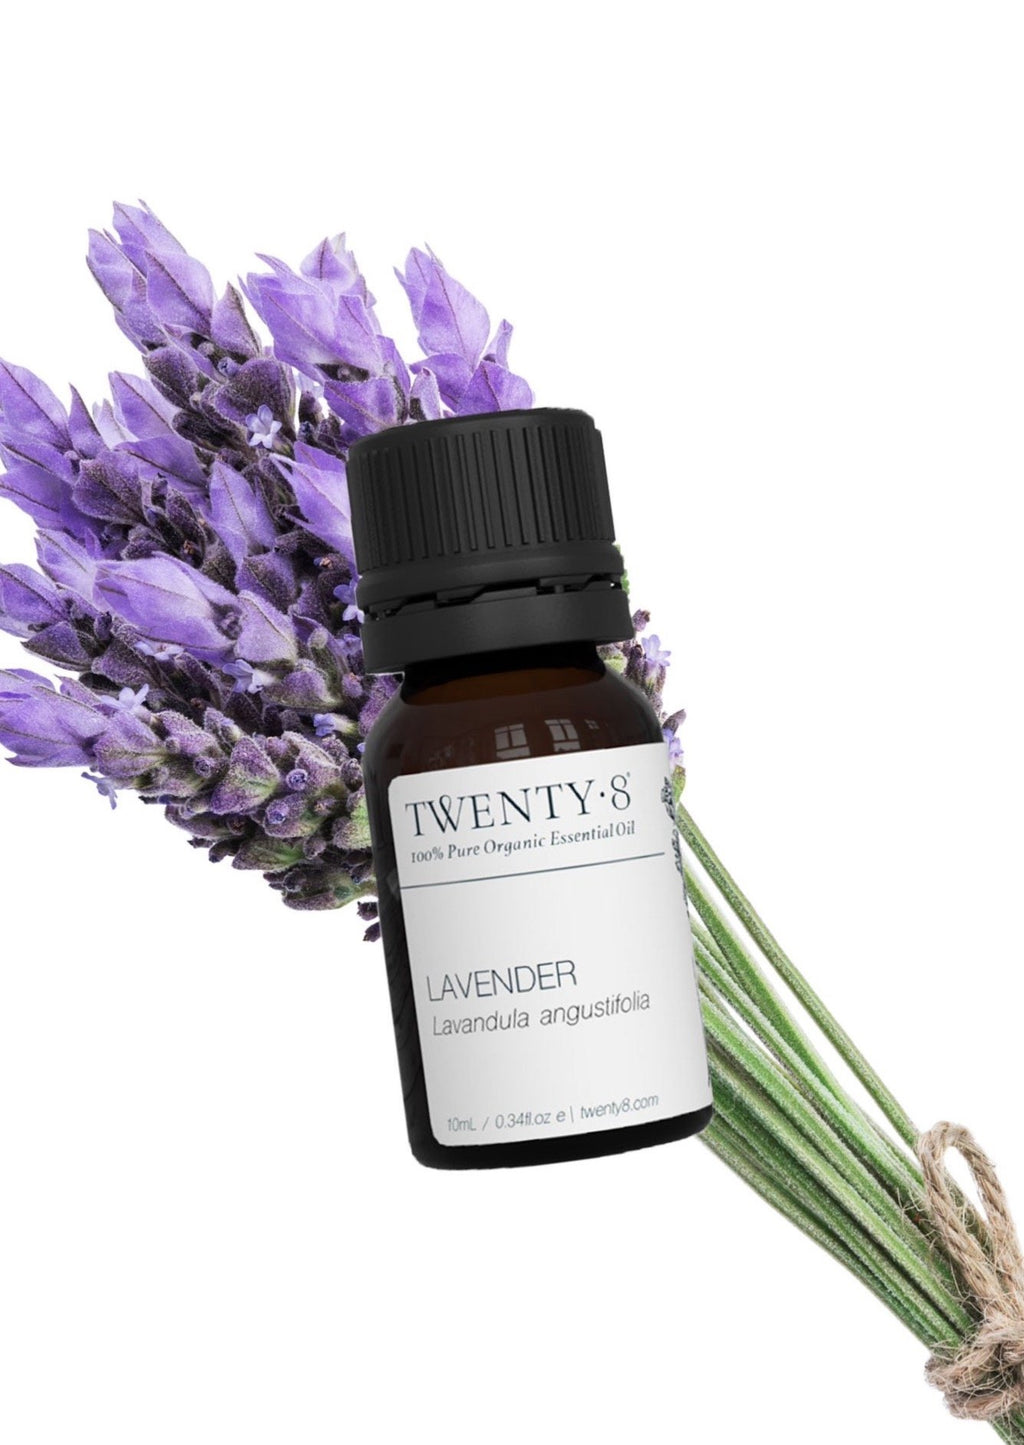 Lavender - 100% Pure, Organic Essential Oil, 10ml  Your first aid kit and dream mum in a bottle! A must-have oil in every home to help nurture, heal, calm, soothe and restore. It is the safest to use directly on small abrasions, bites and stings and is the perfect sleep aid with one drop on your pillow.  No home should be without the healing, nurturing and calming qualities of Lavender.